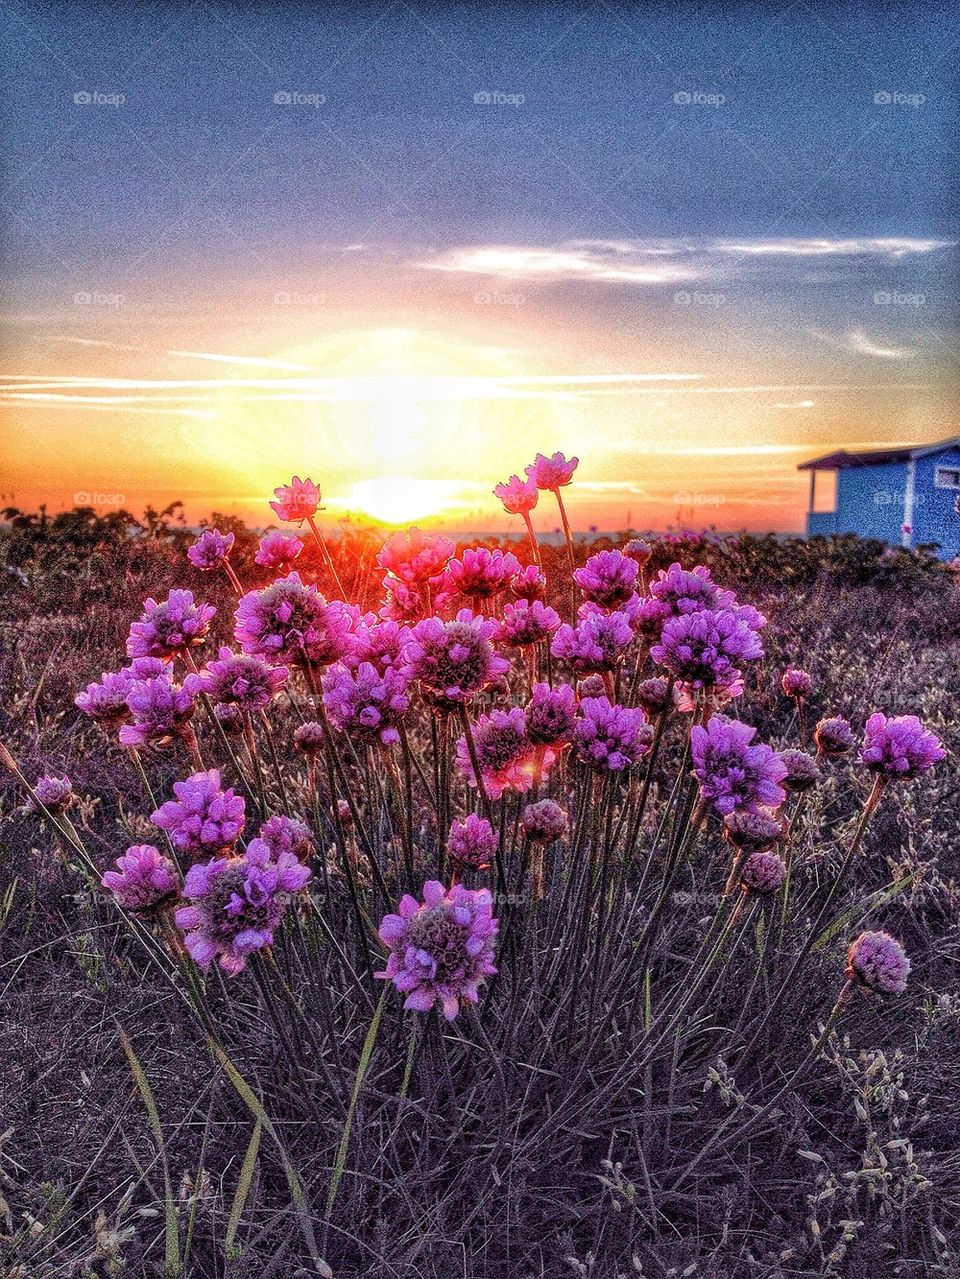 Flowers in sunset